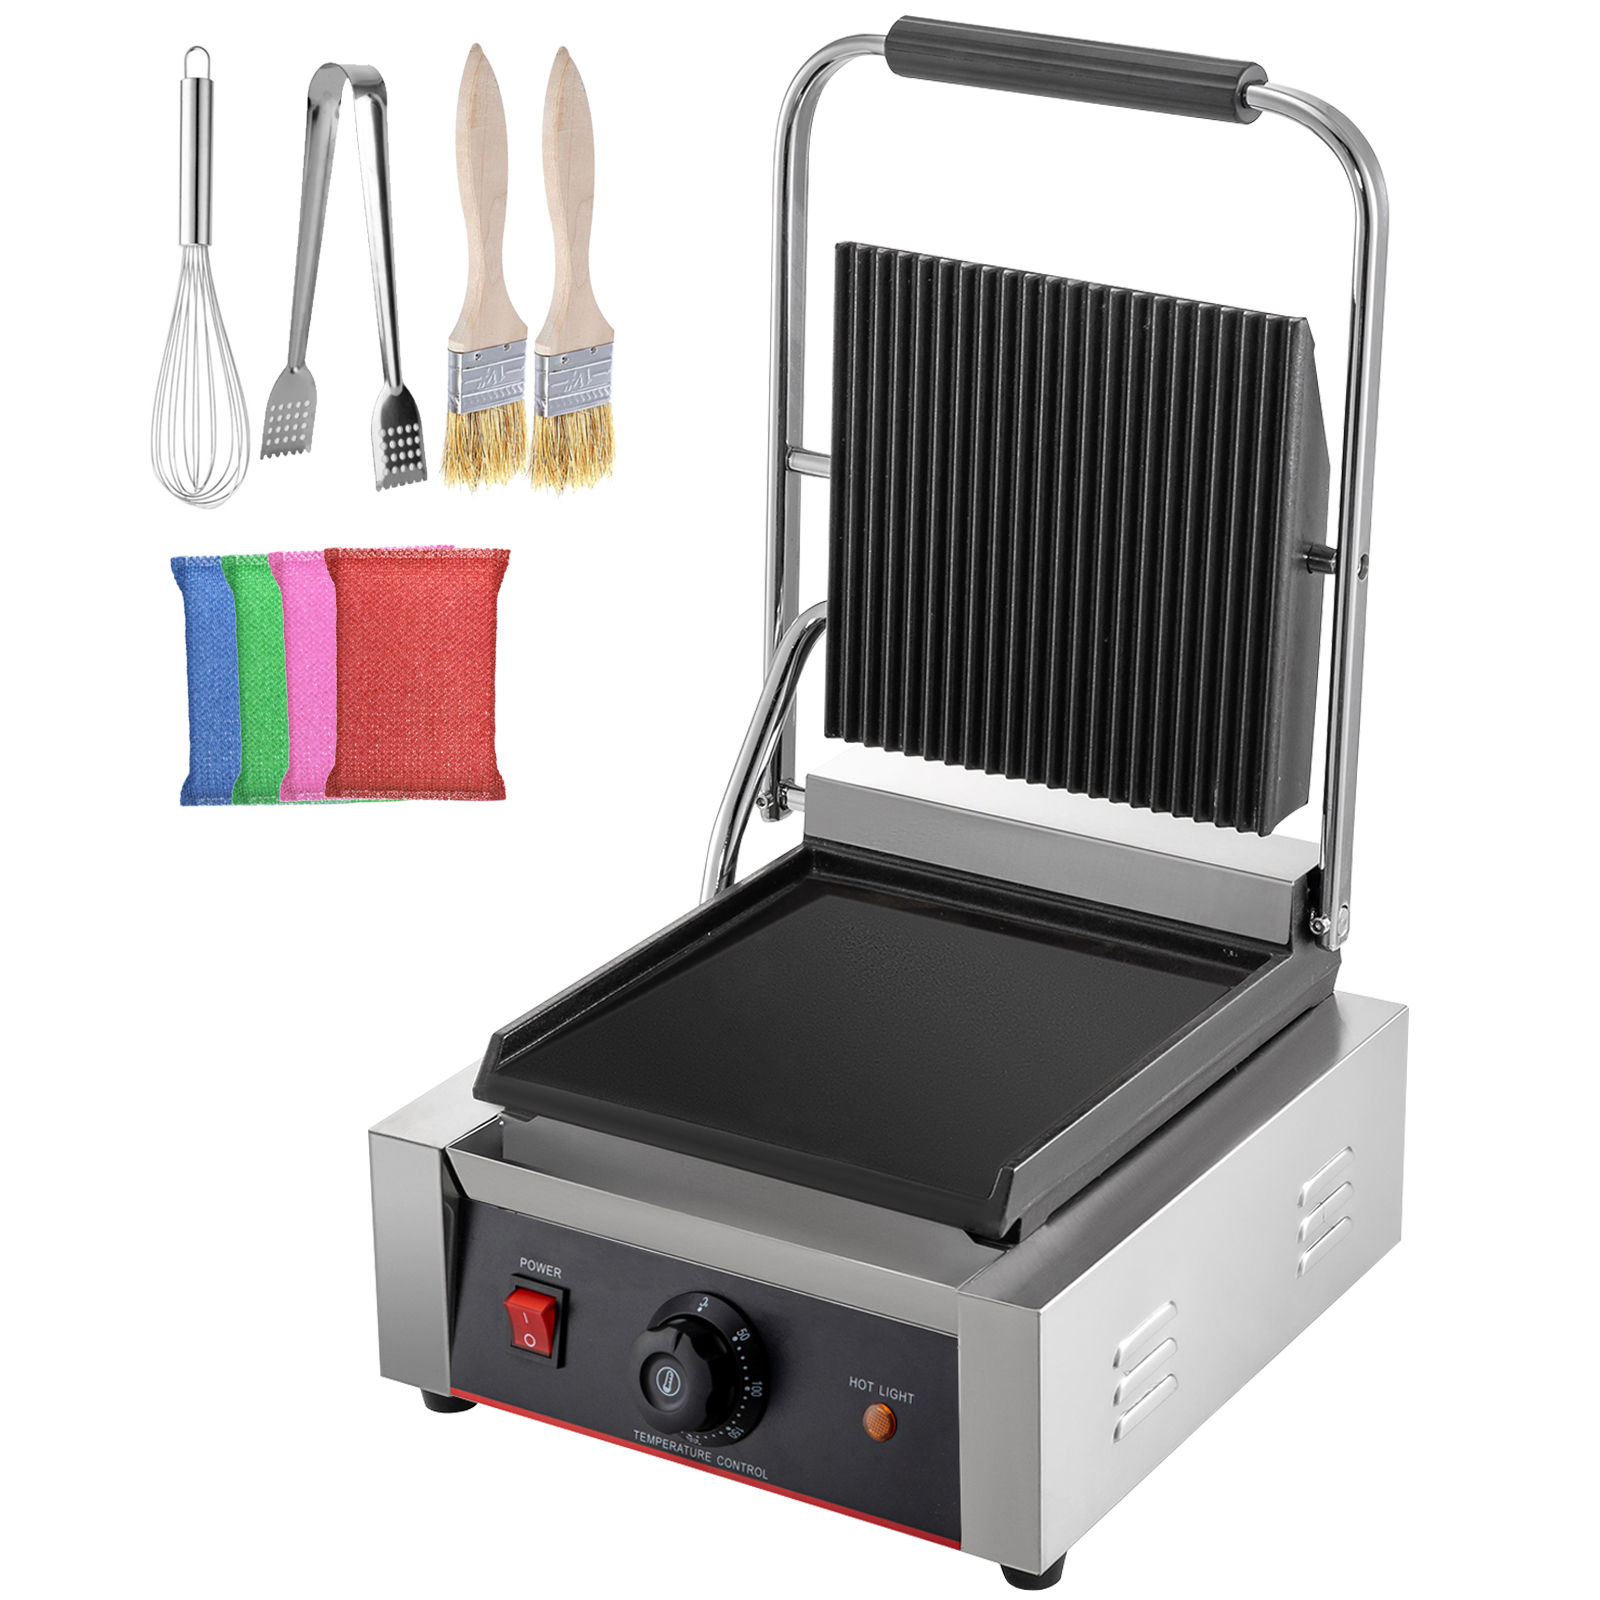 1800W Electric Fit Grill Electric Panini Press Hot Plate Sandwich Maker,Toastie Machine,Stainless Steel Sandwhich PressThermostat 